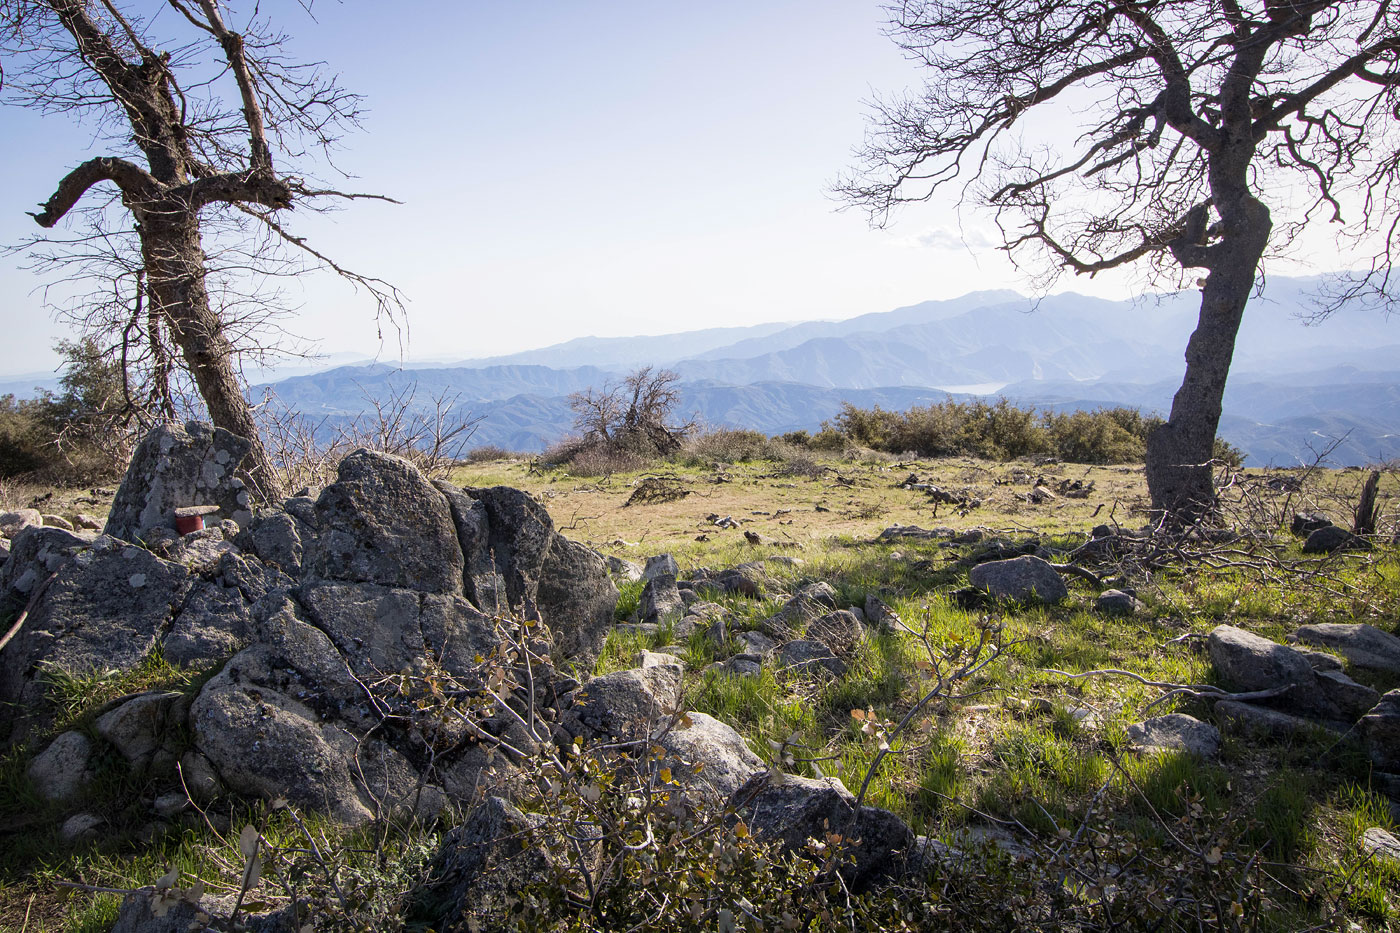 Hike Liebre Mountain via Pacific Crest Trail in Angeles National Forest, California - Stav is Lost